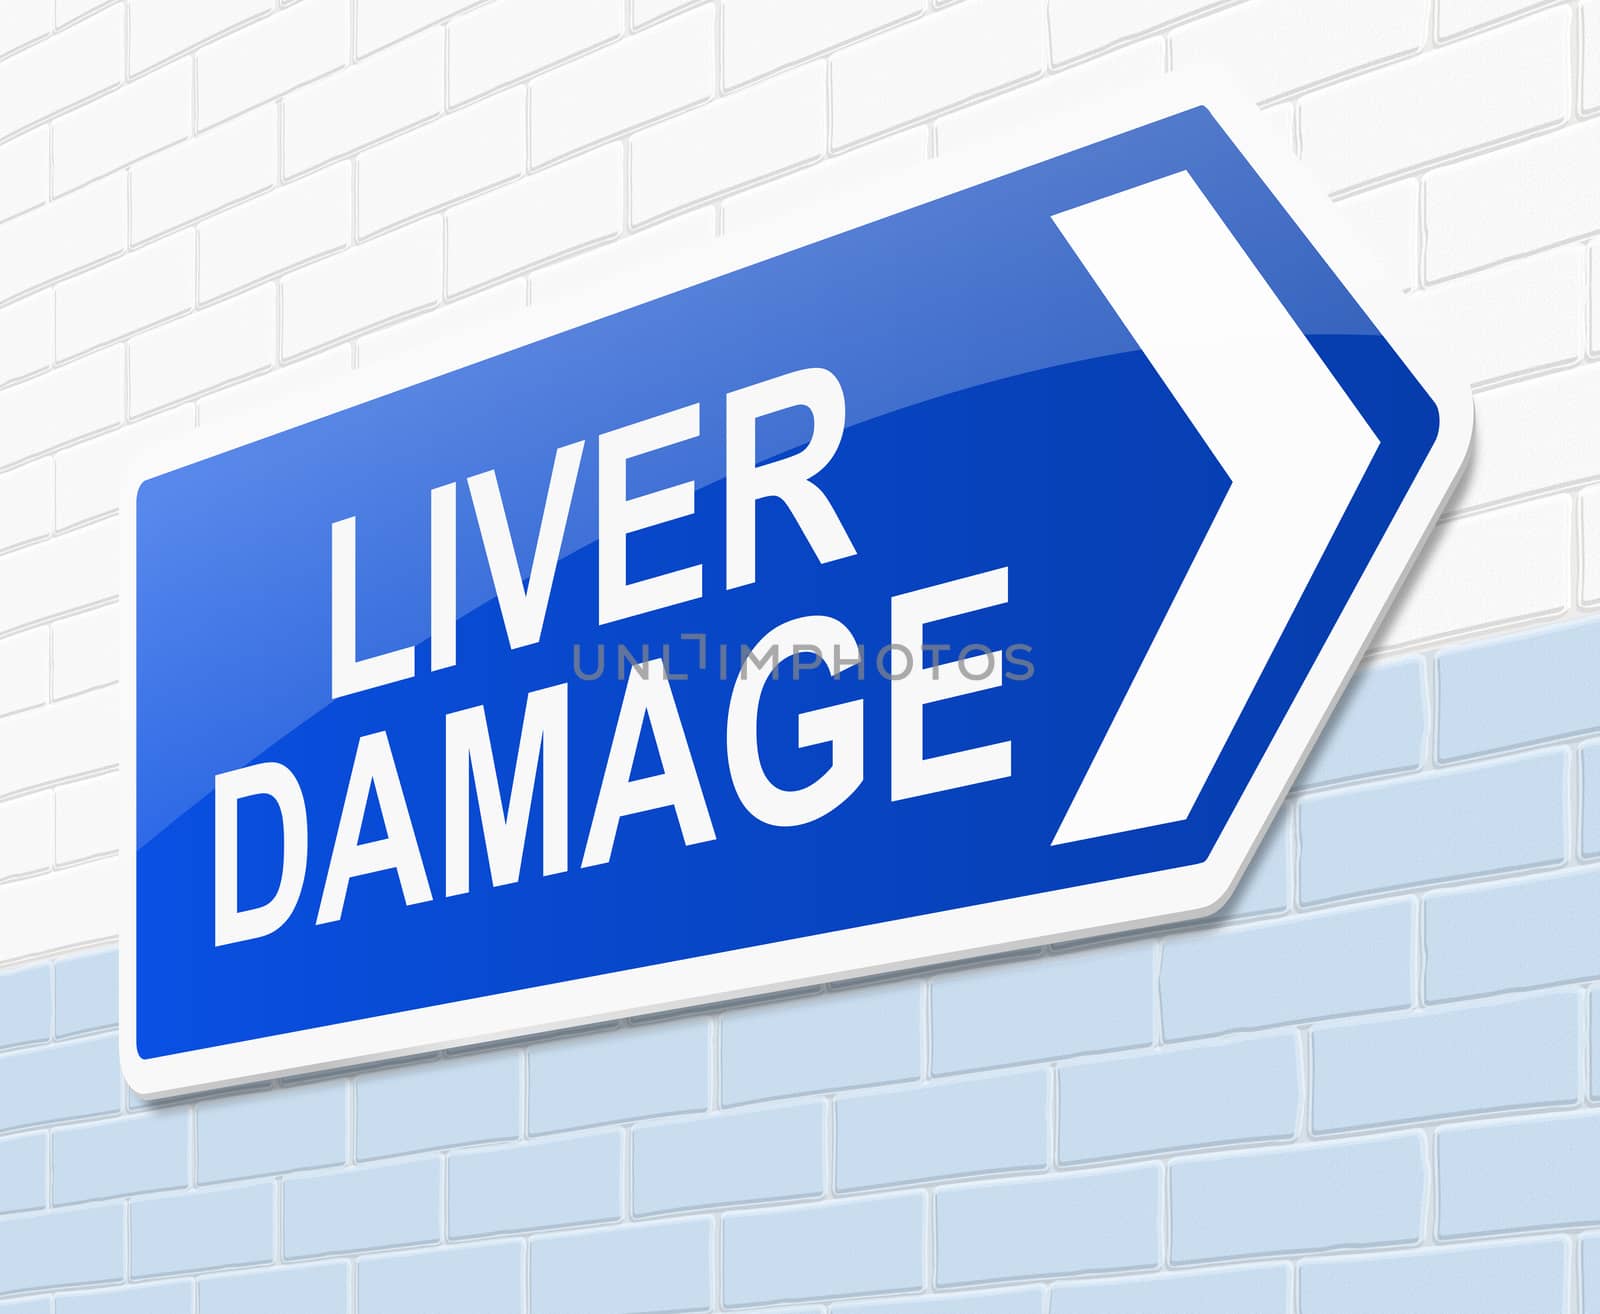 Illustration depicting a sign with a cliver damage concept.